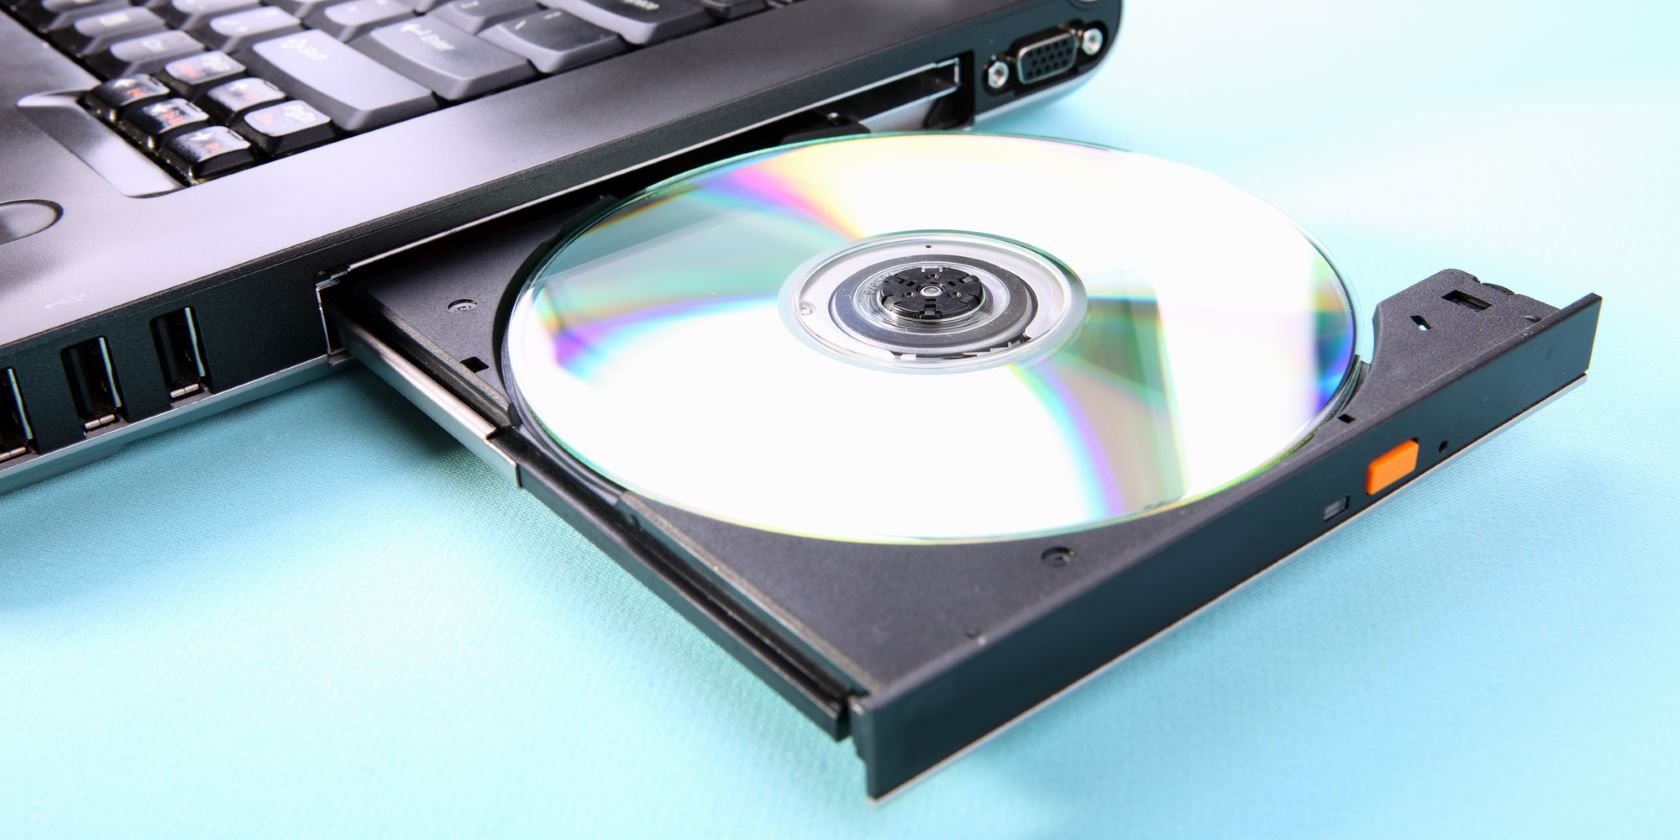 How to Repair Damaged CDs or DVDs and Recover Data